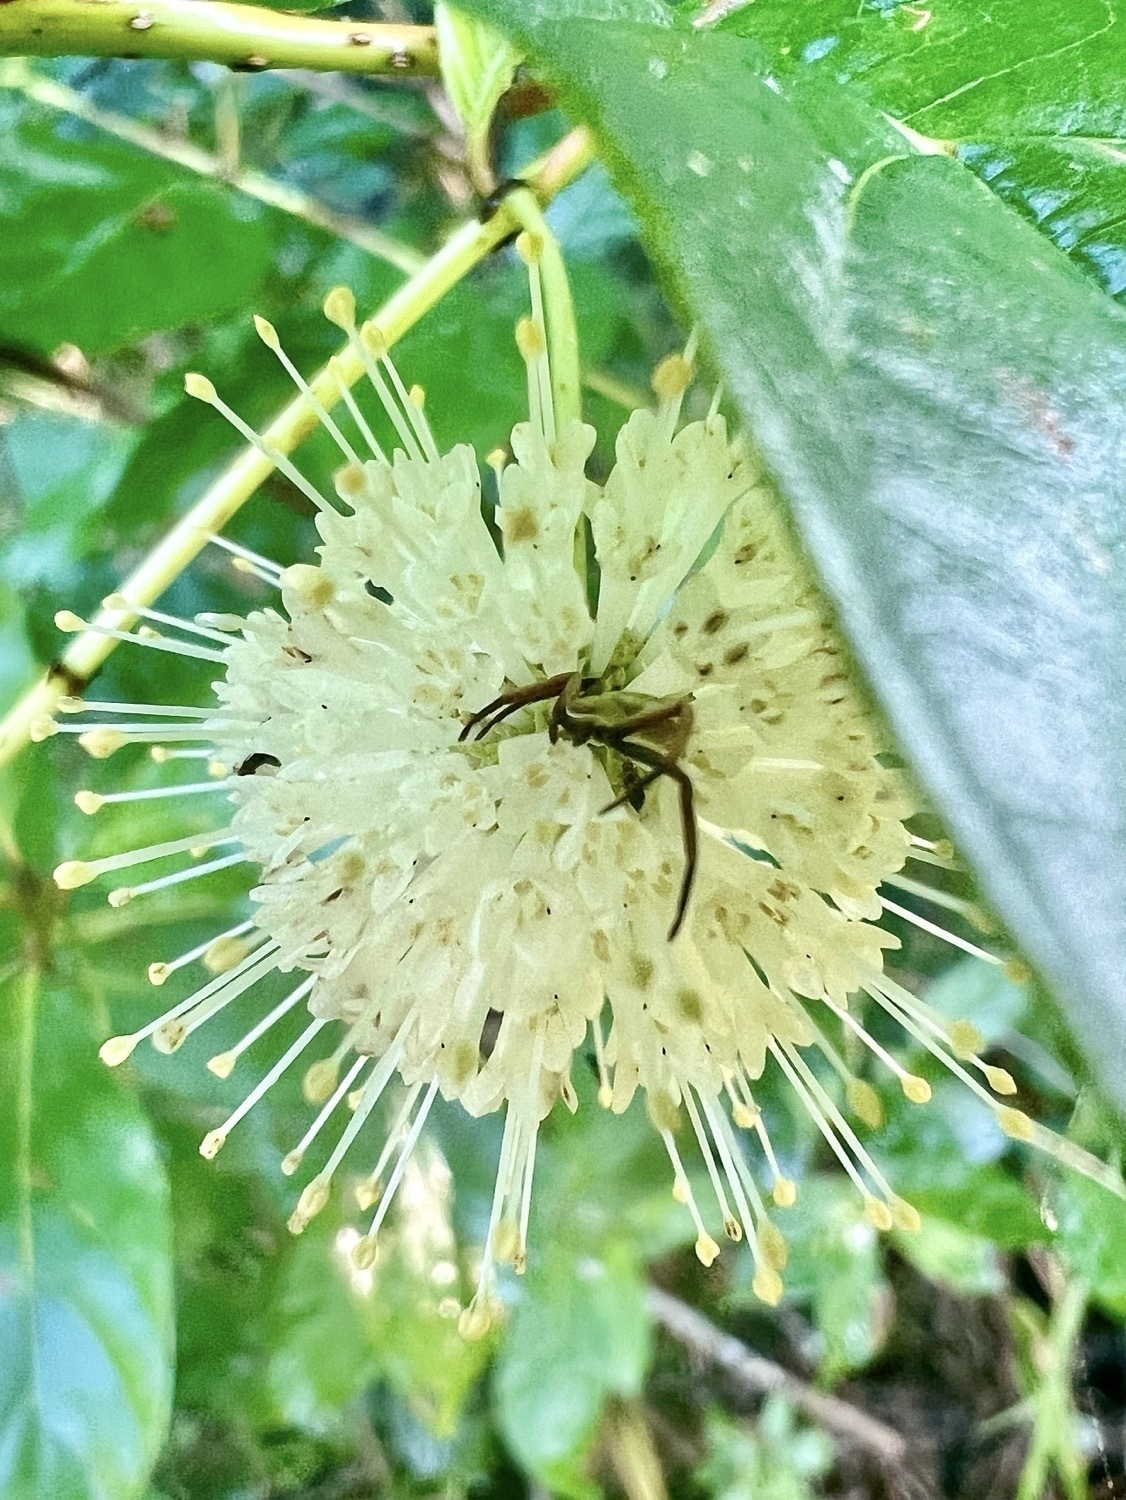 A small white ball-like cluster of small white flowers under green leaves. A small greenish-gray flower crab spider is perched on the top center of the sphere.